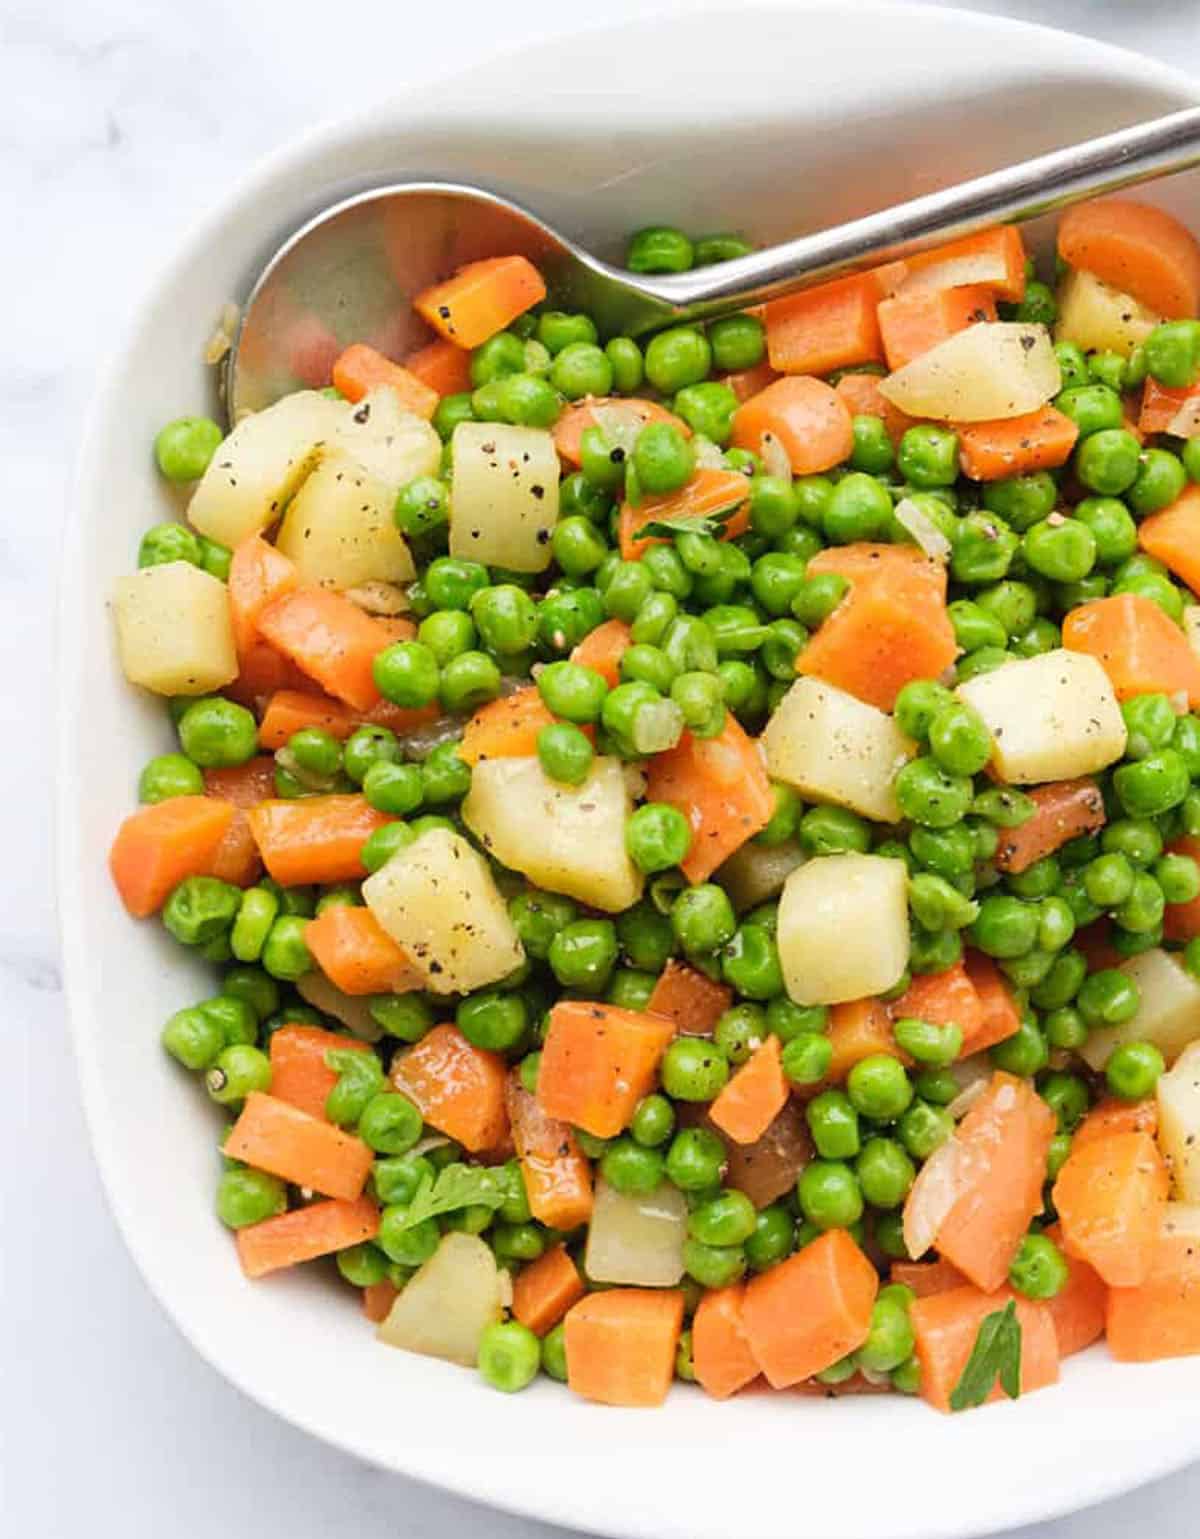 Top view of a square white serving plate with peas and carrots with cubed potatoes.